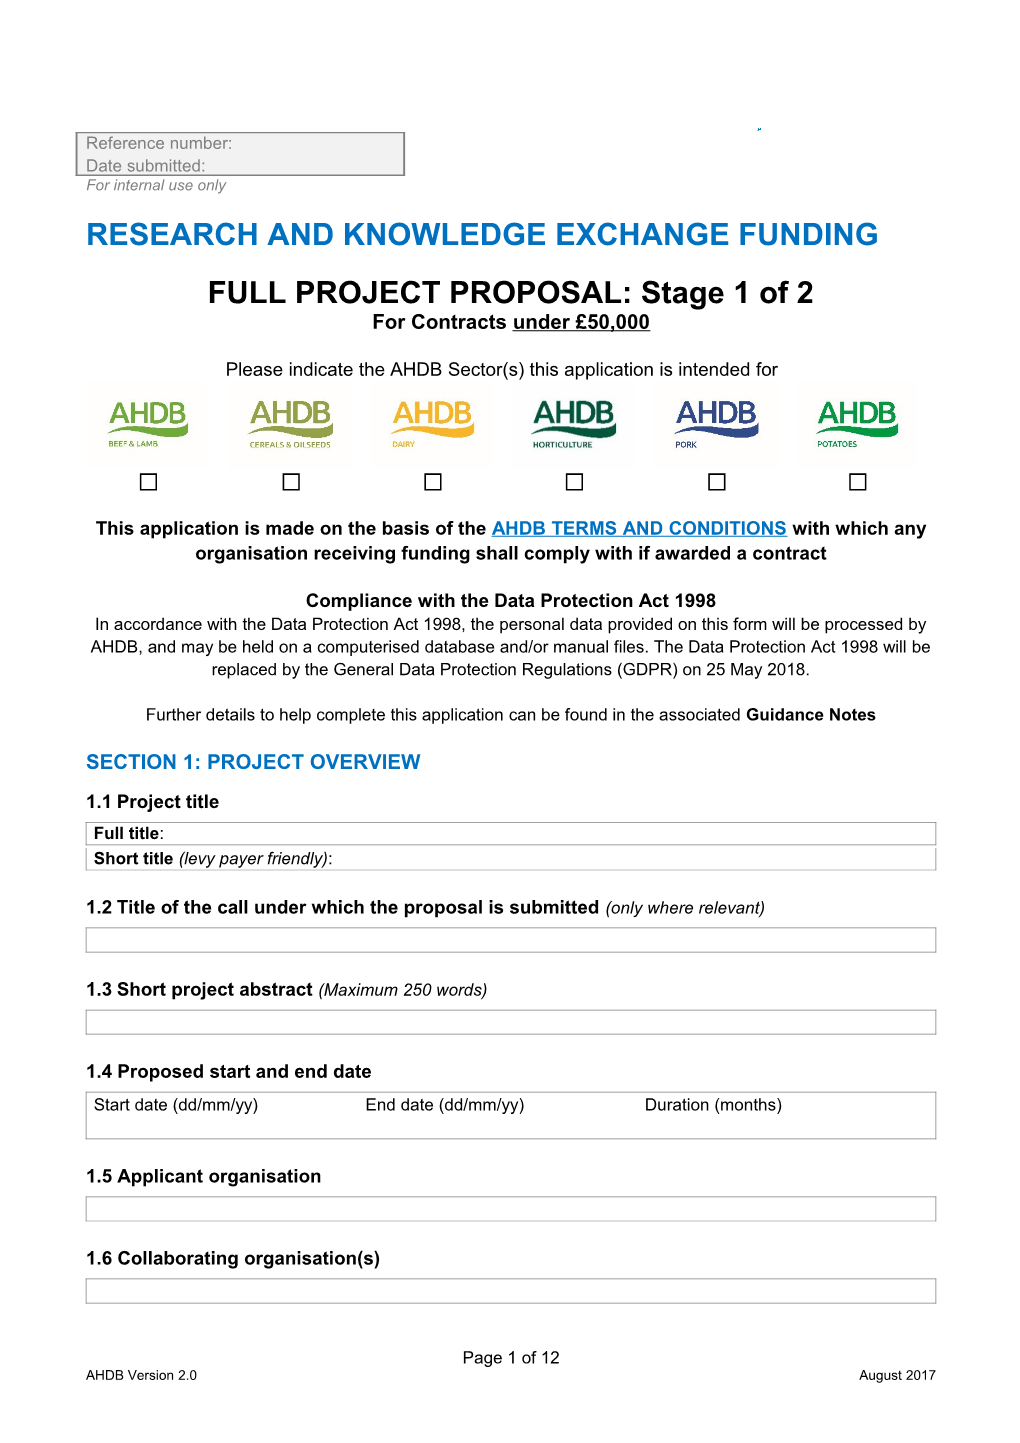 Research and Knowledge Exchangefunding